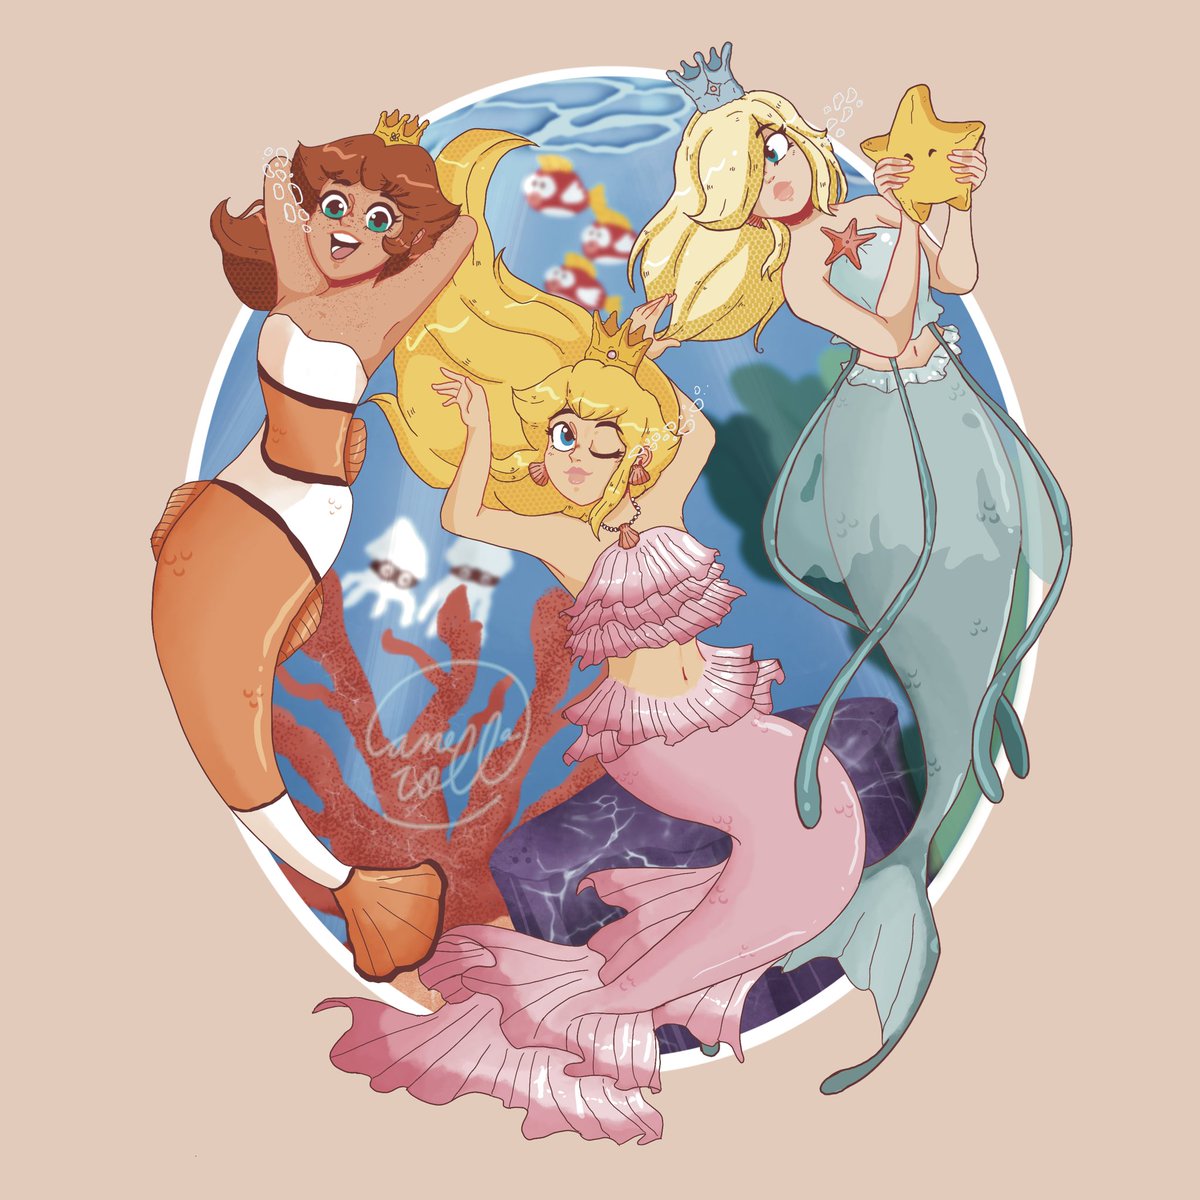 finished just in time for #mermay 🧜‍♀️ some #mermaid princesses to send off the month of may! 

#PrincessPeach #PrincessDaisy #Rosalina #SuperMarioBros #supermariogalaxy